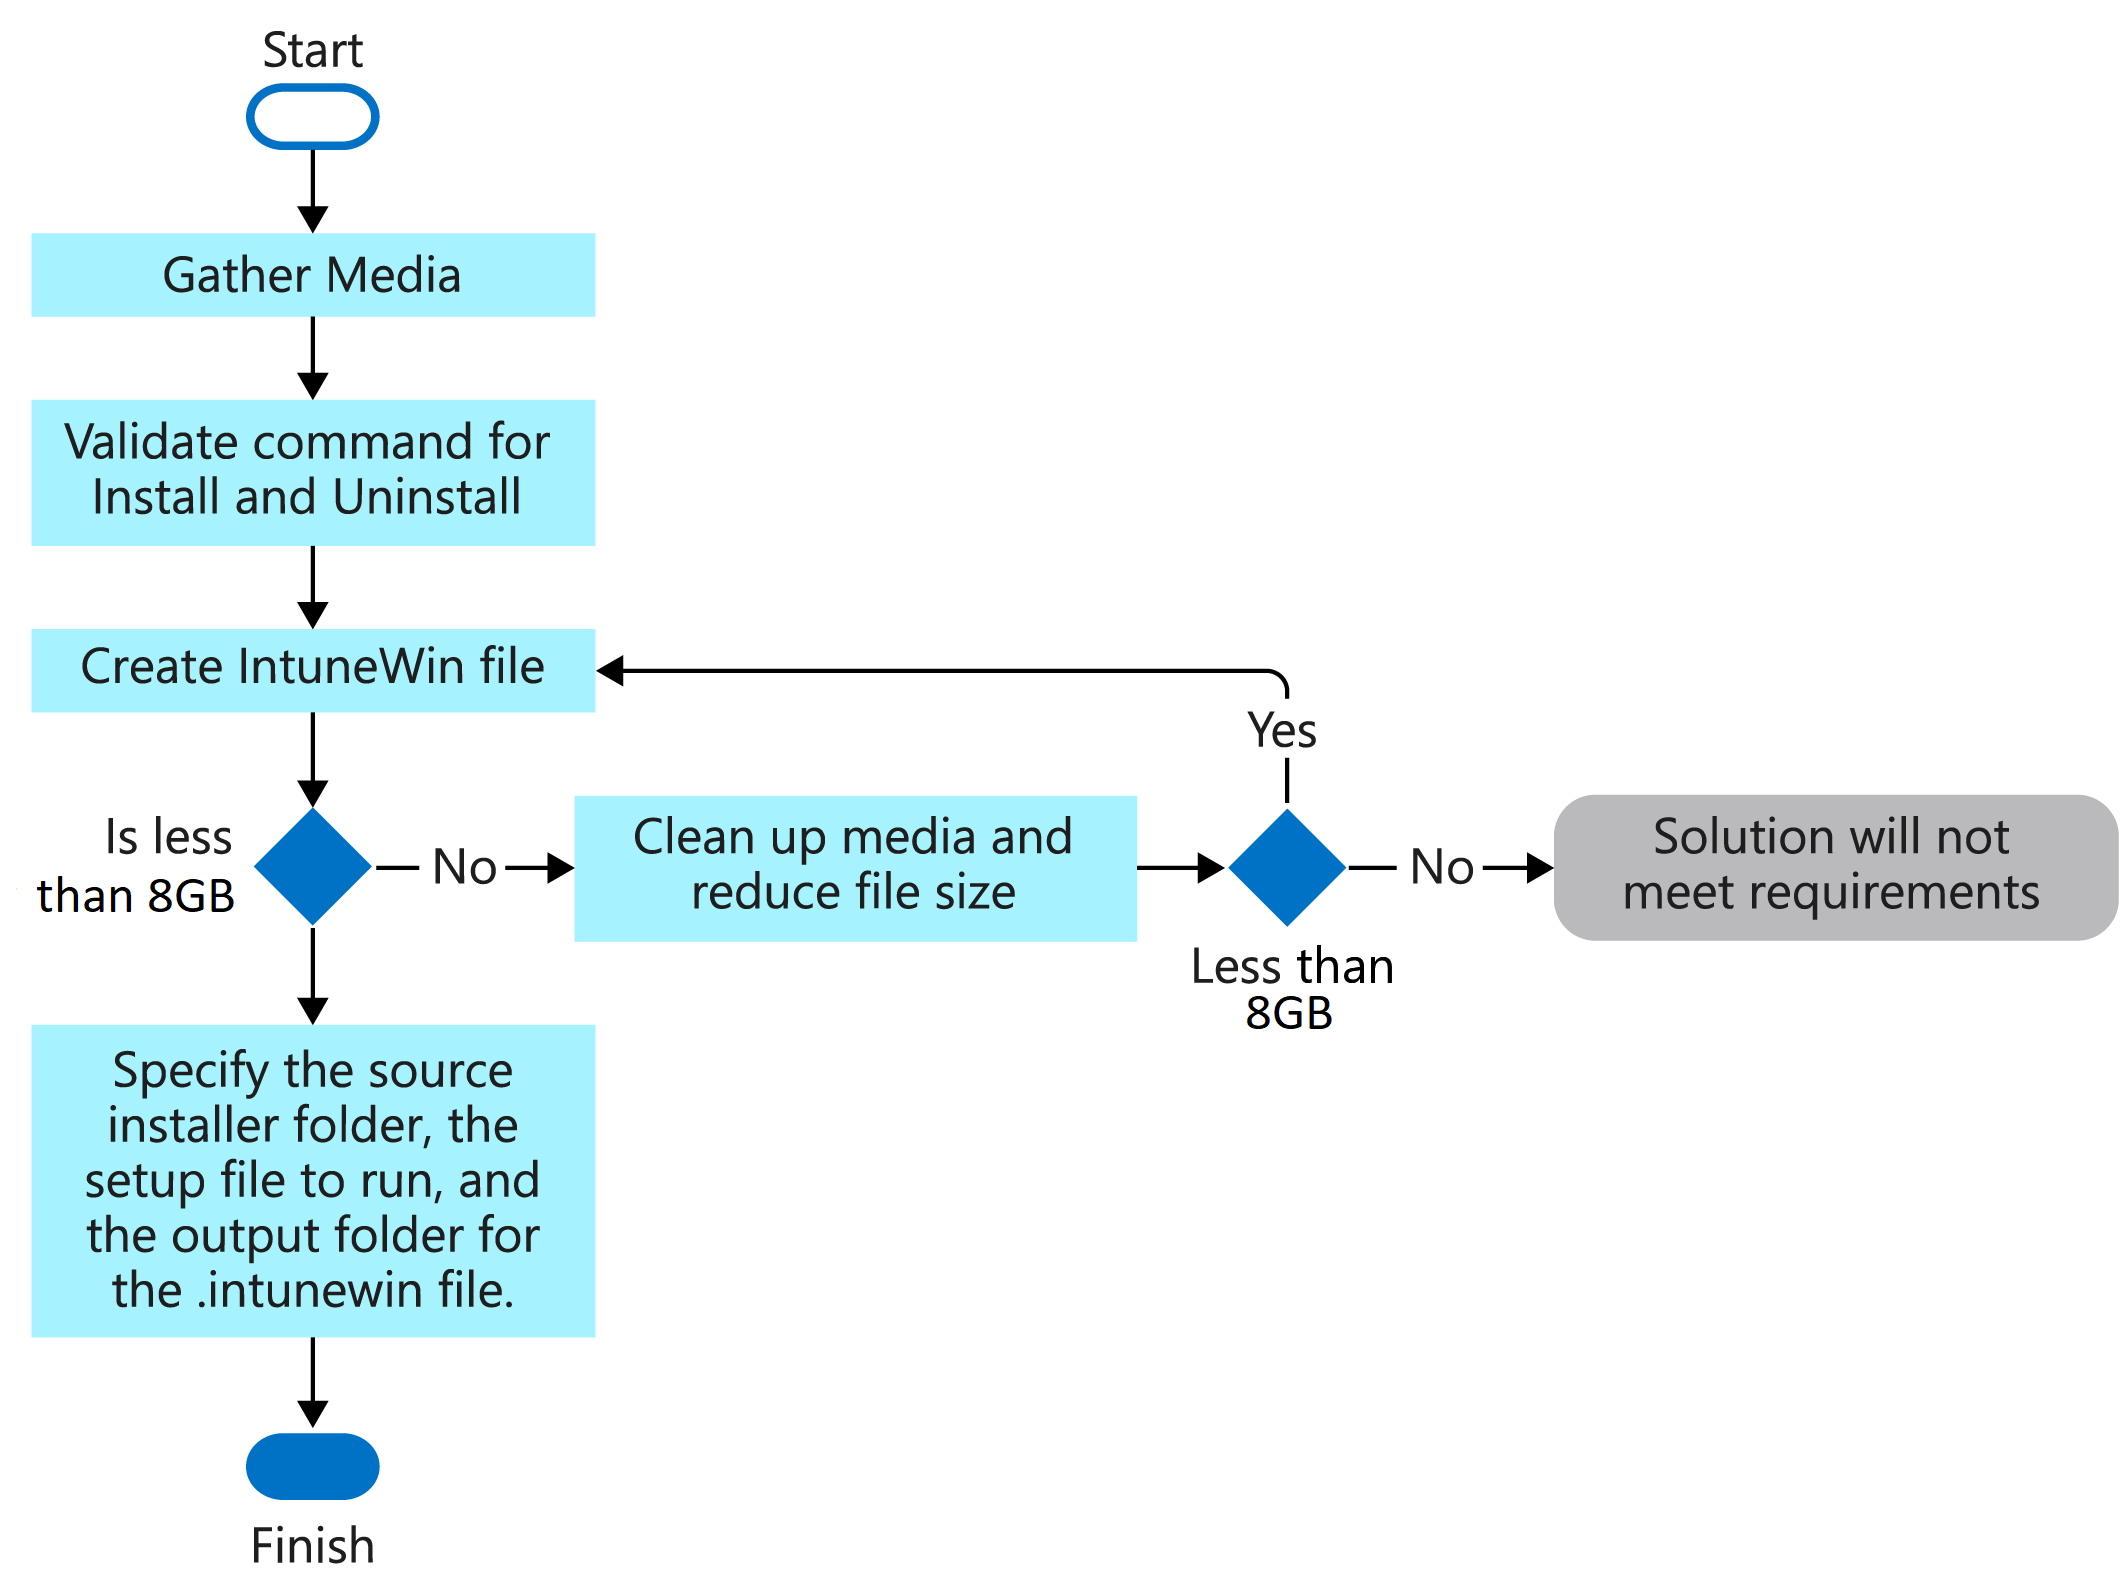 Flow chart of the process to create a .intunewin file.